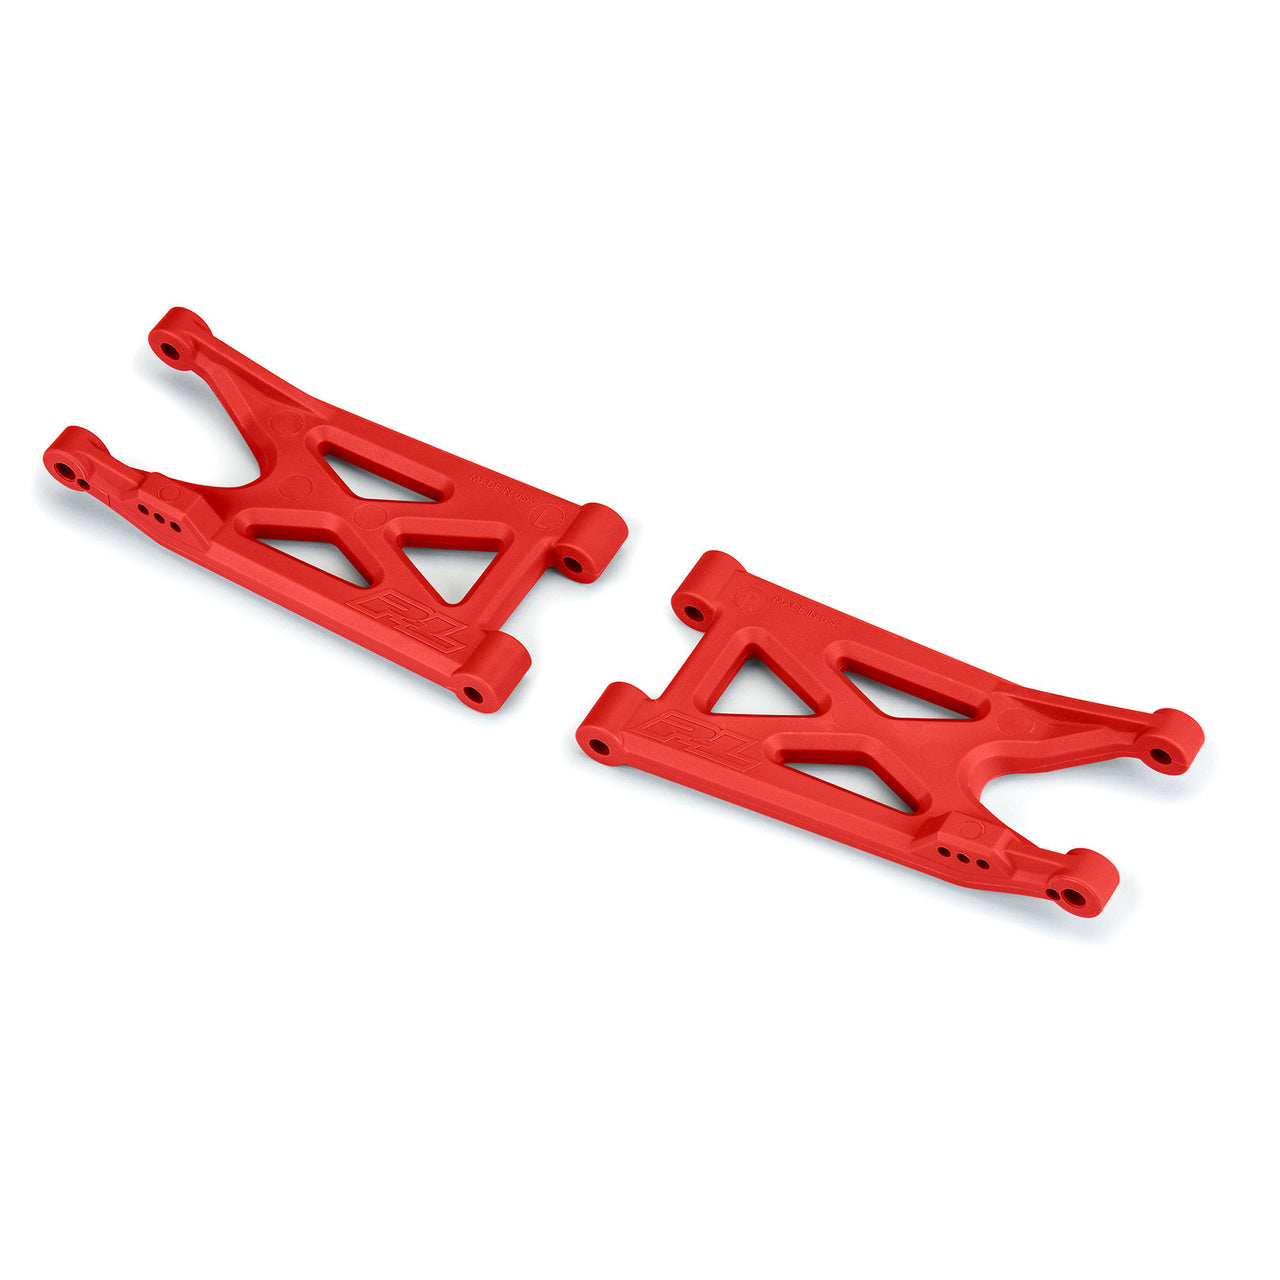 PRO640007 Bash Armor Rear Suspension Arms (Red) for ARRMA 3S Vehicles